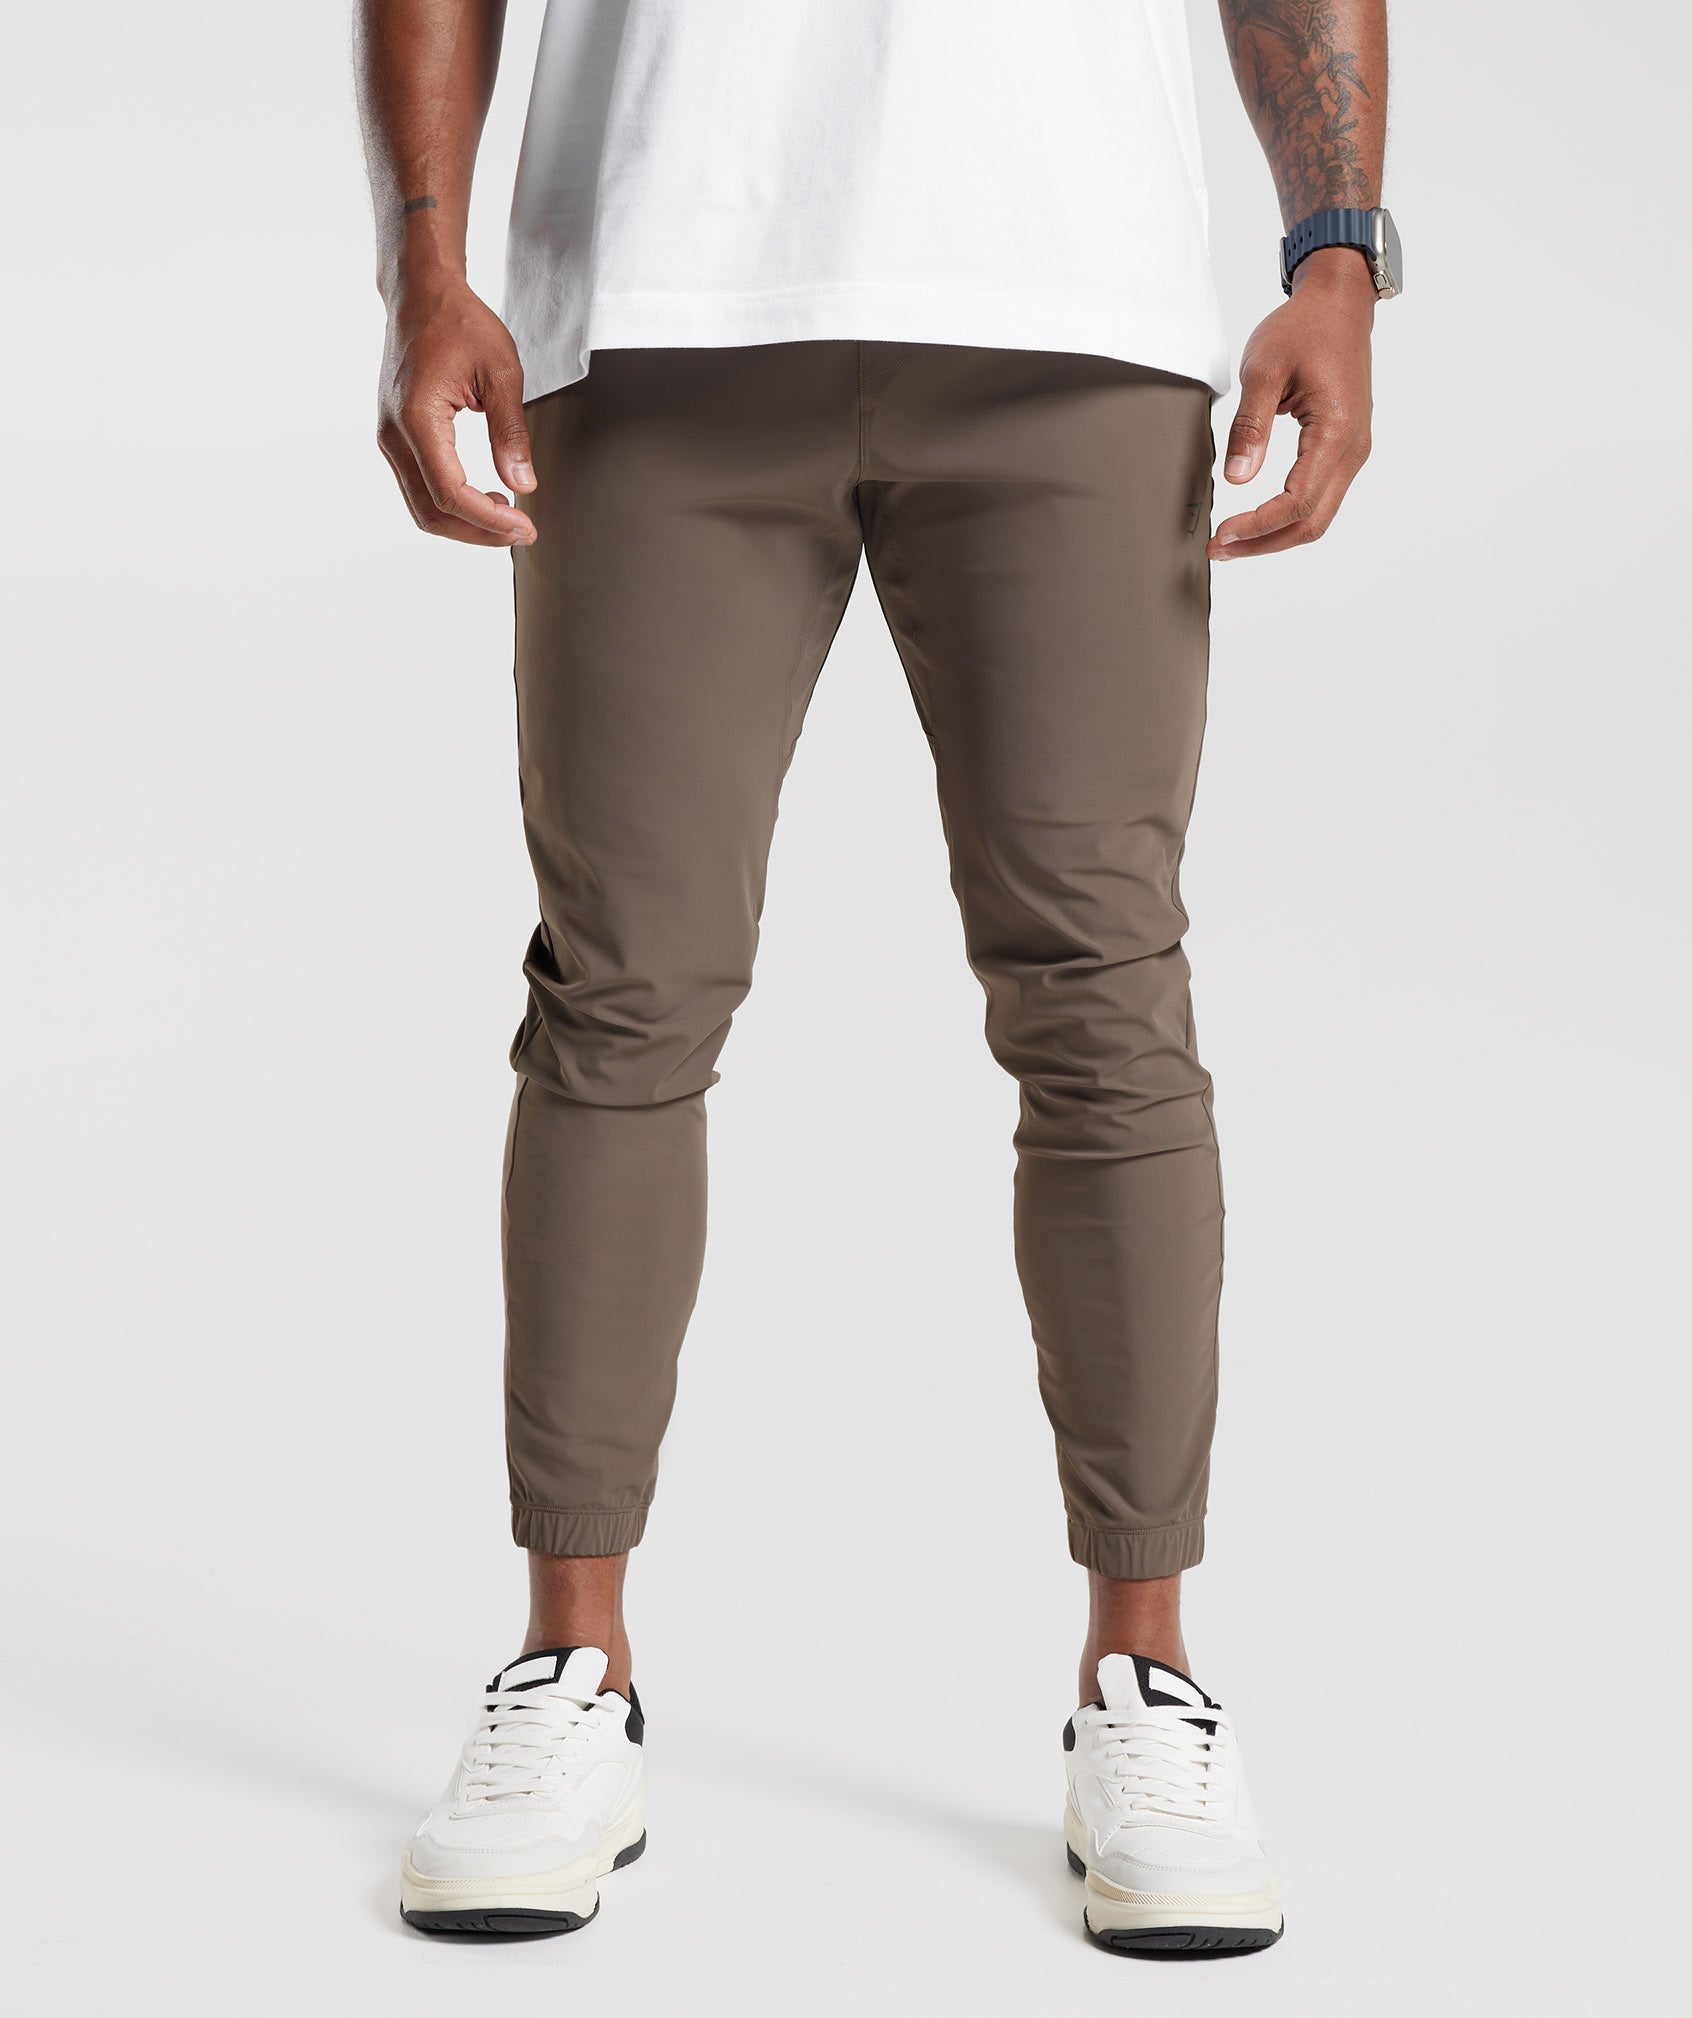 Not sure if this is allowed but I'm looking for a pair of sandy nude  sweatpants to go with Trench POC, I've got on the Gymshark Venture Pants in  Moss Grey and